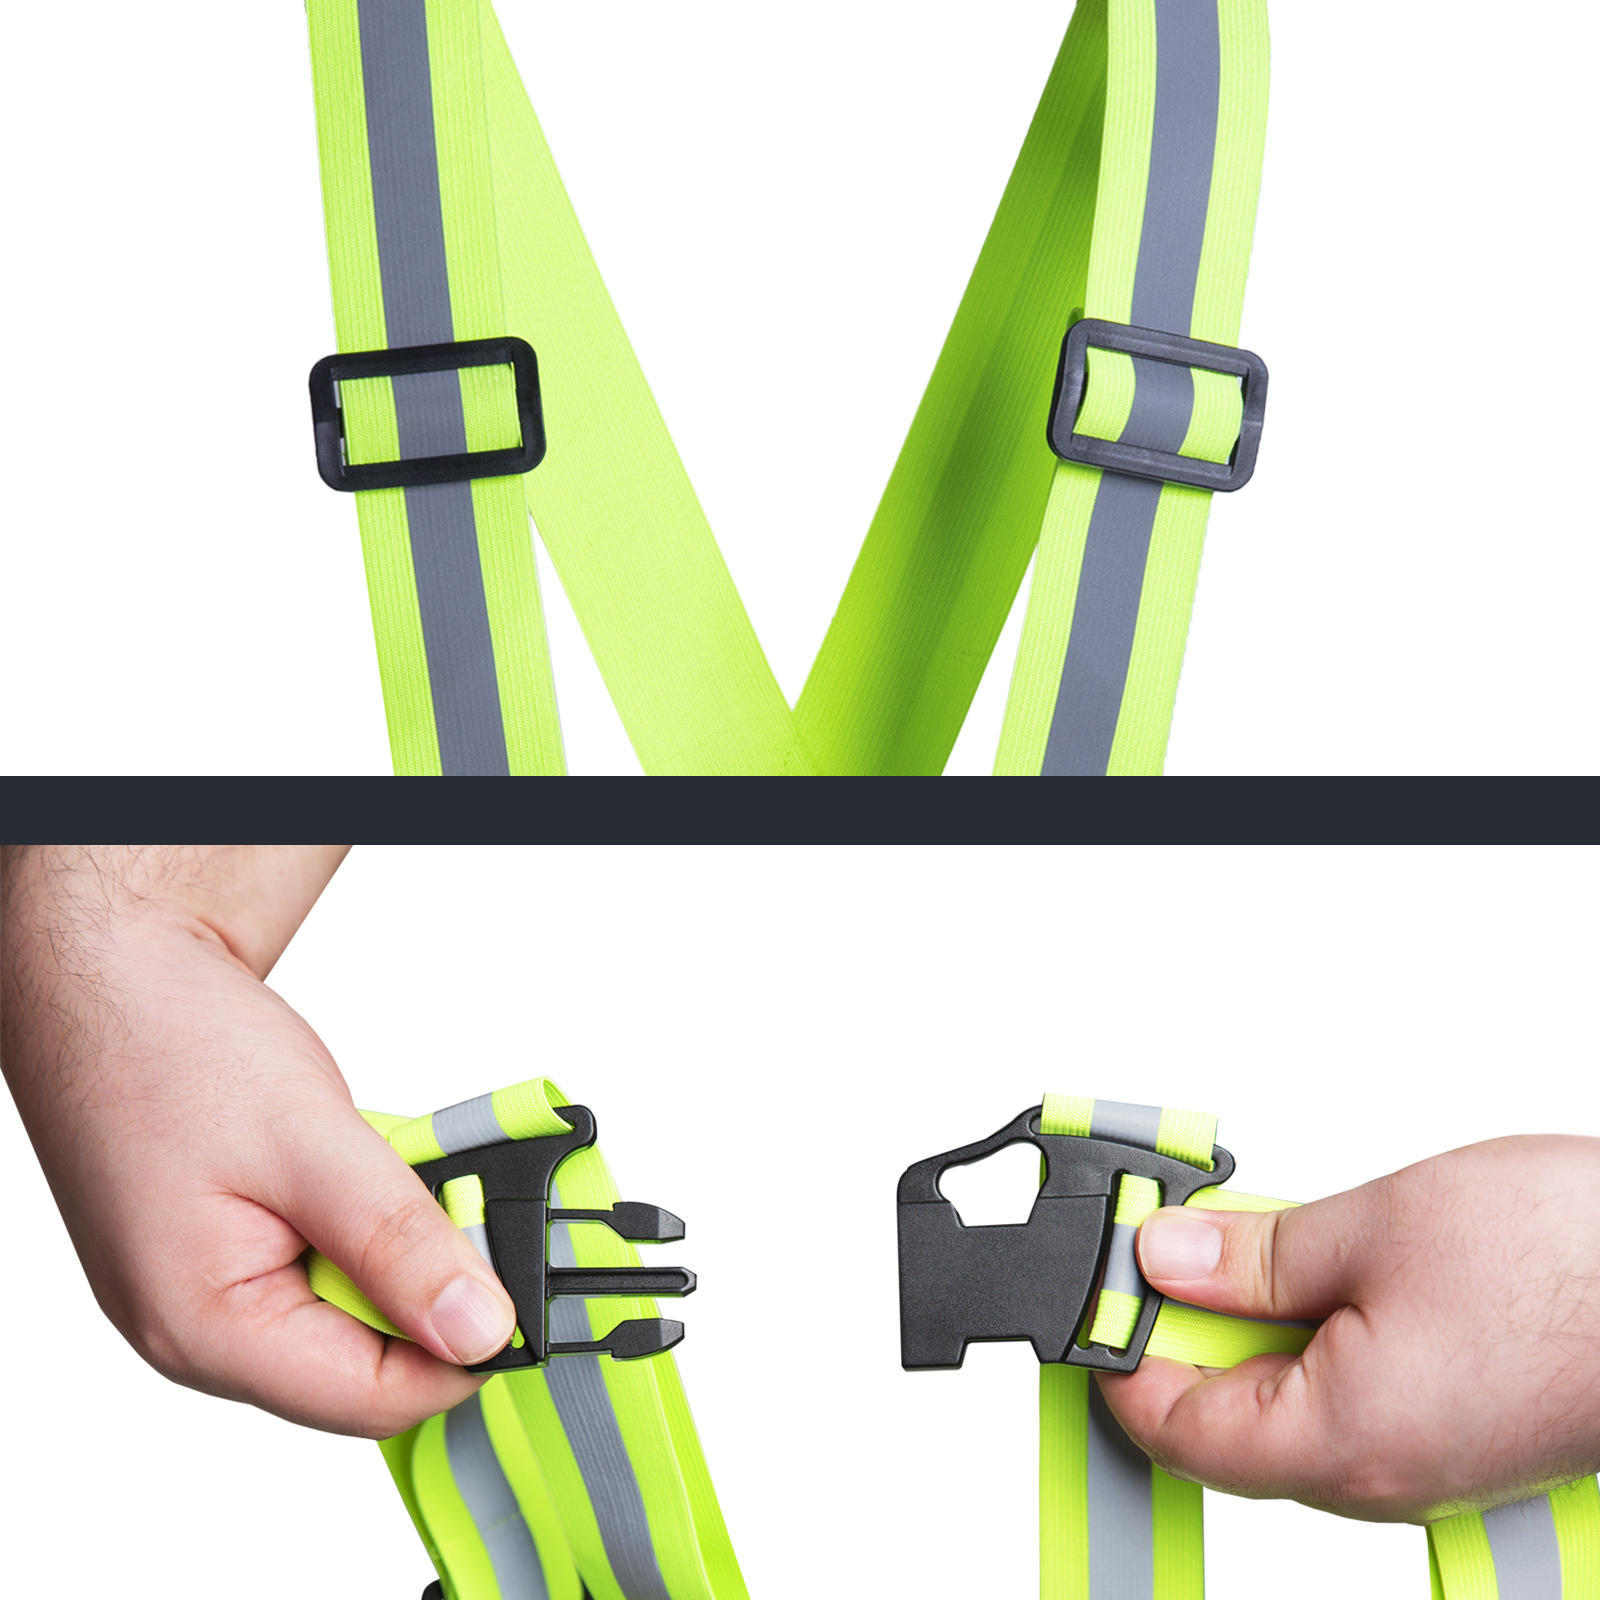 Features the adjustable straps and the closing system that the lime JORESTECH safety suspenders has